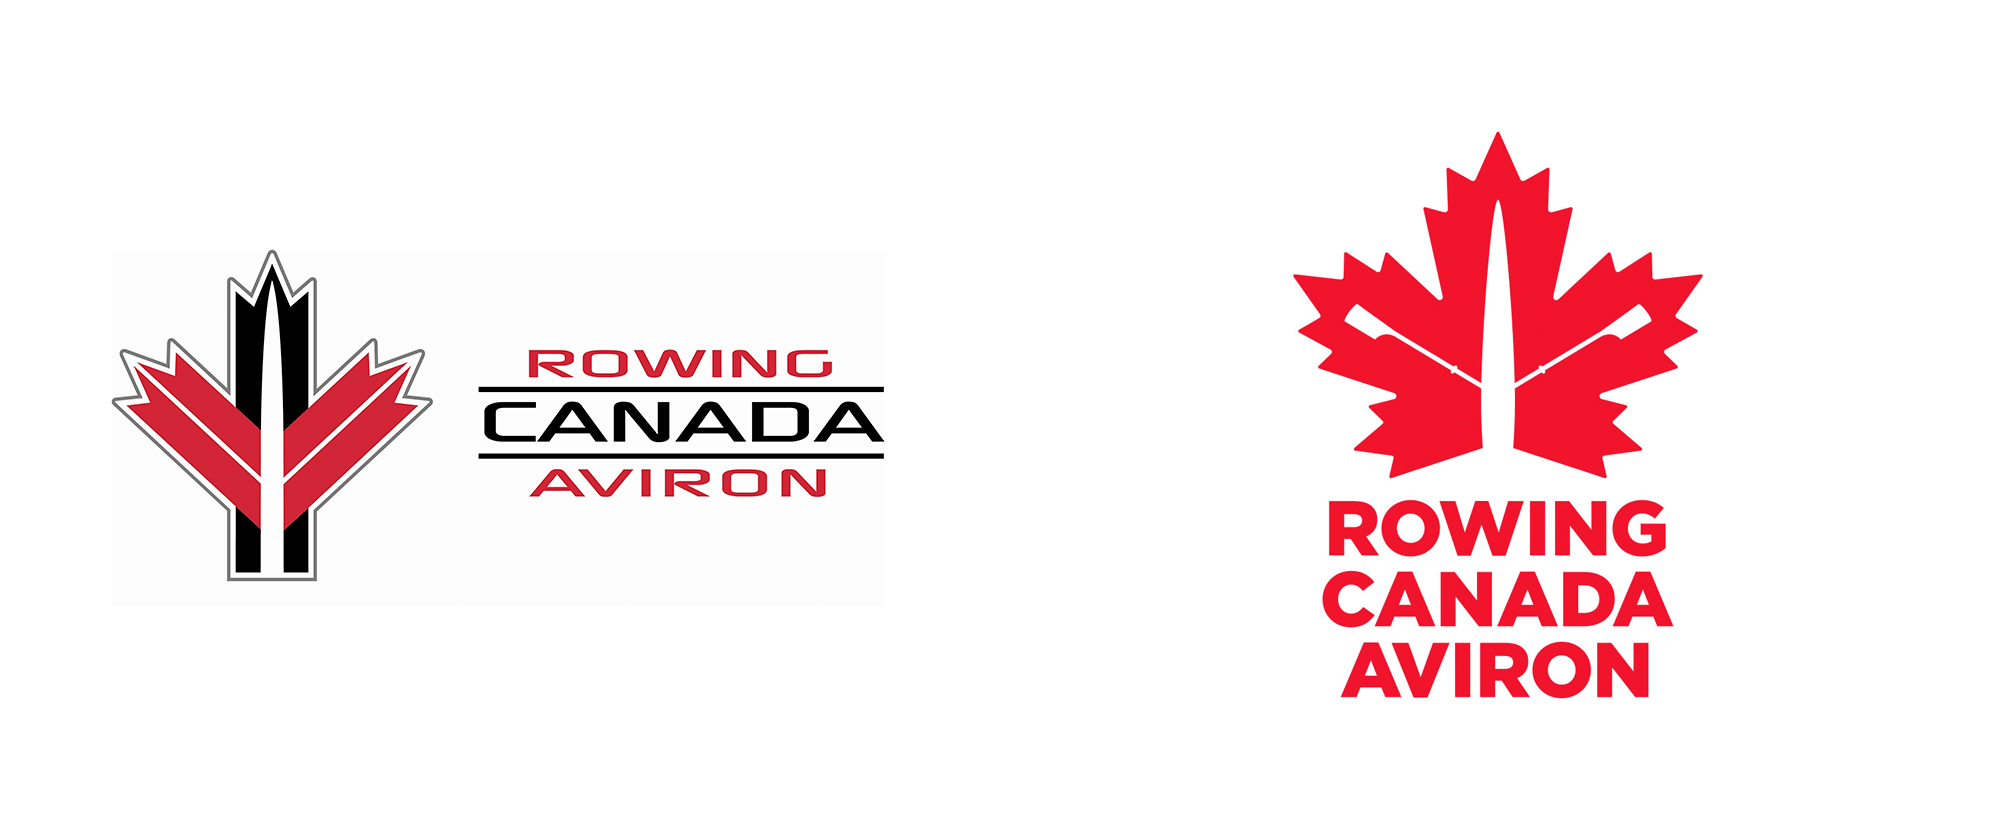 Red Canadian Leaf Logo - Brand New: New Logo for Rowing Canada Aviron by They